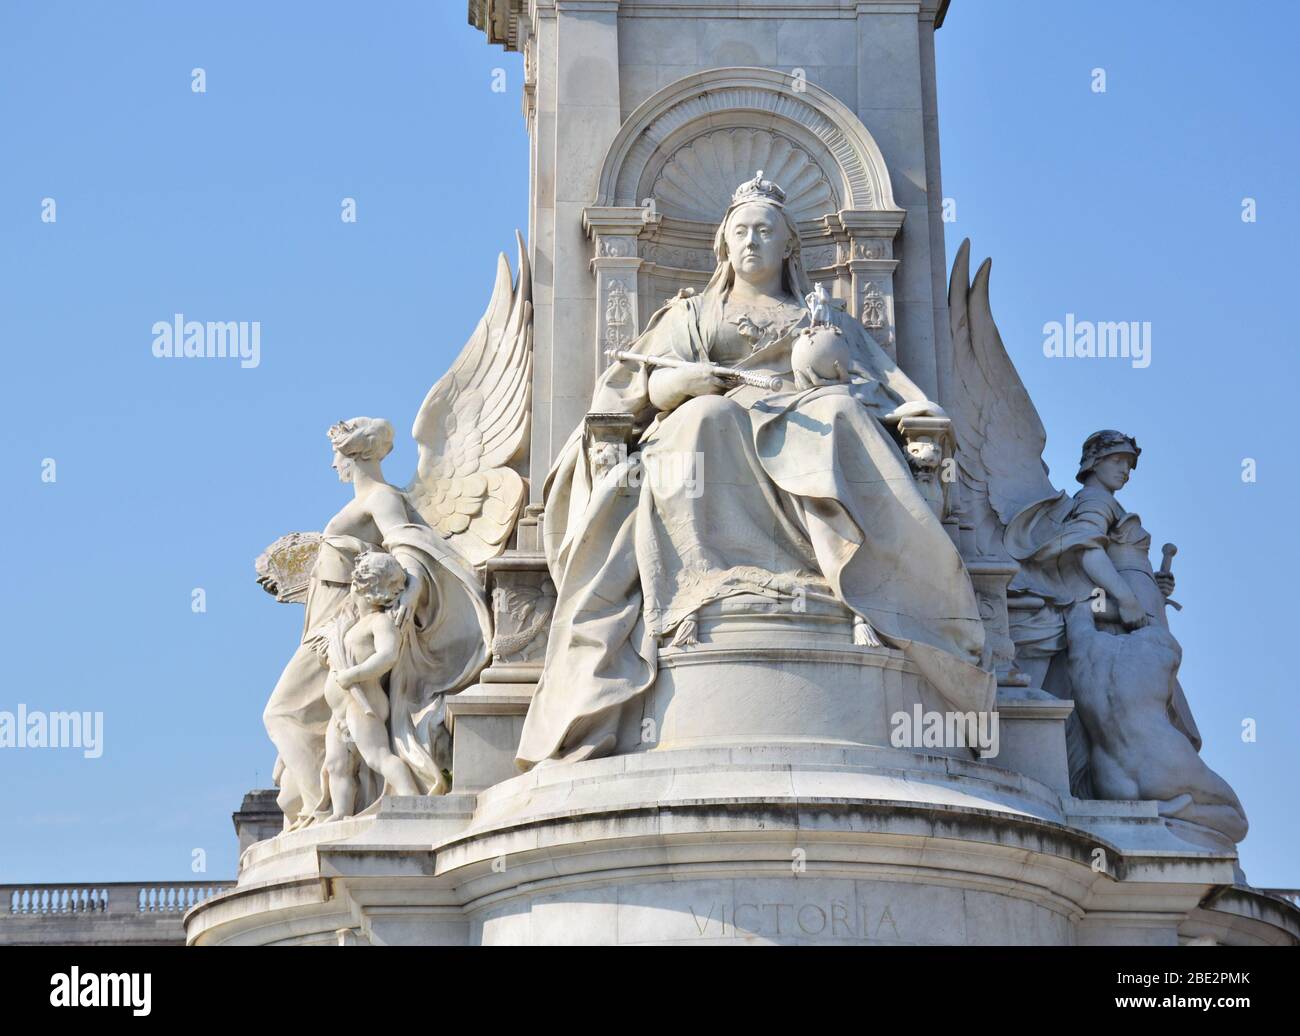 Victoria Memorial in front of Buckingham Palace in London Stock Photo